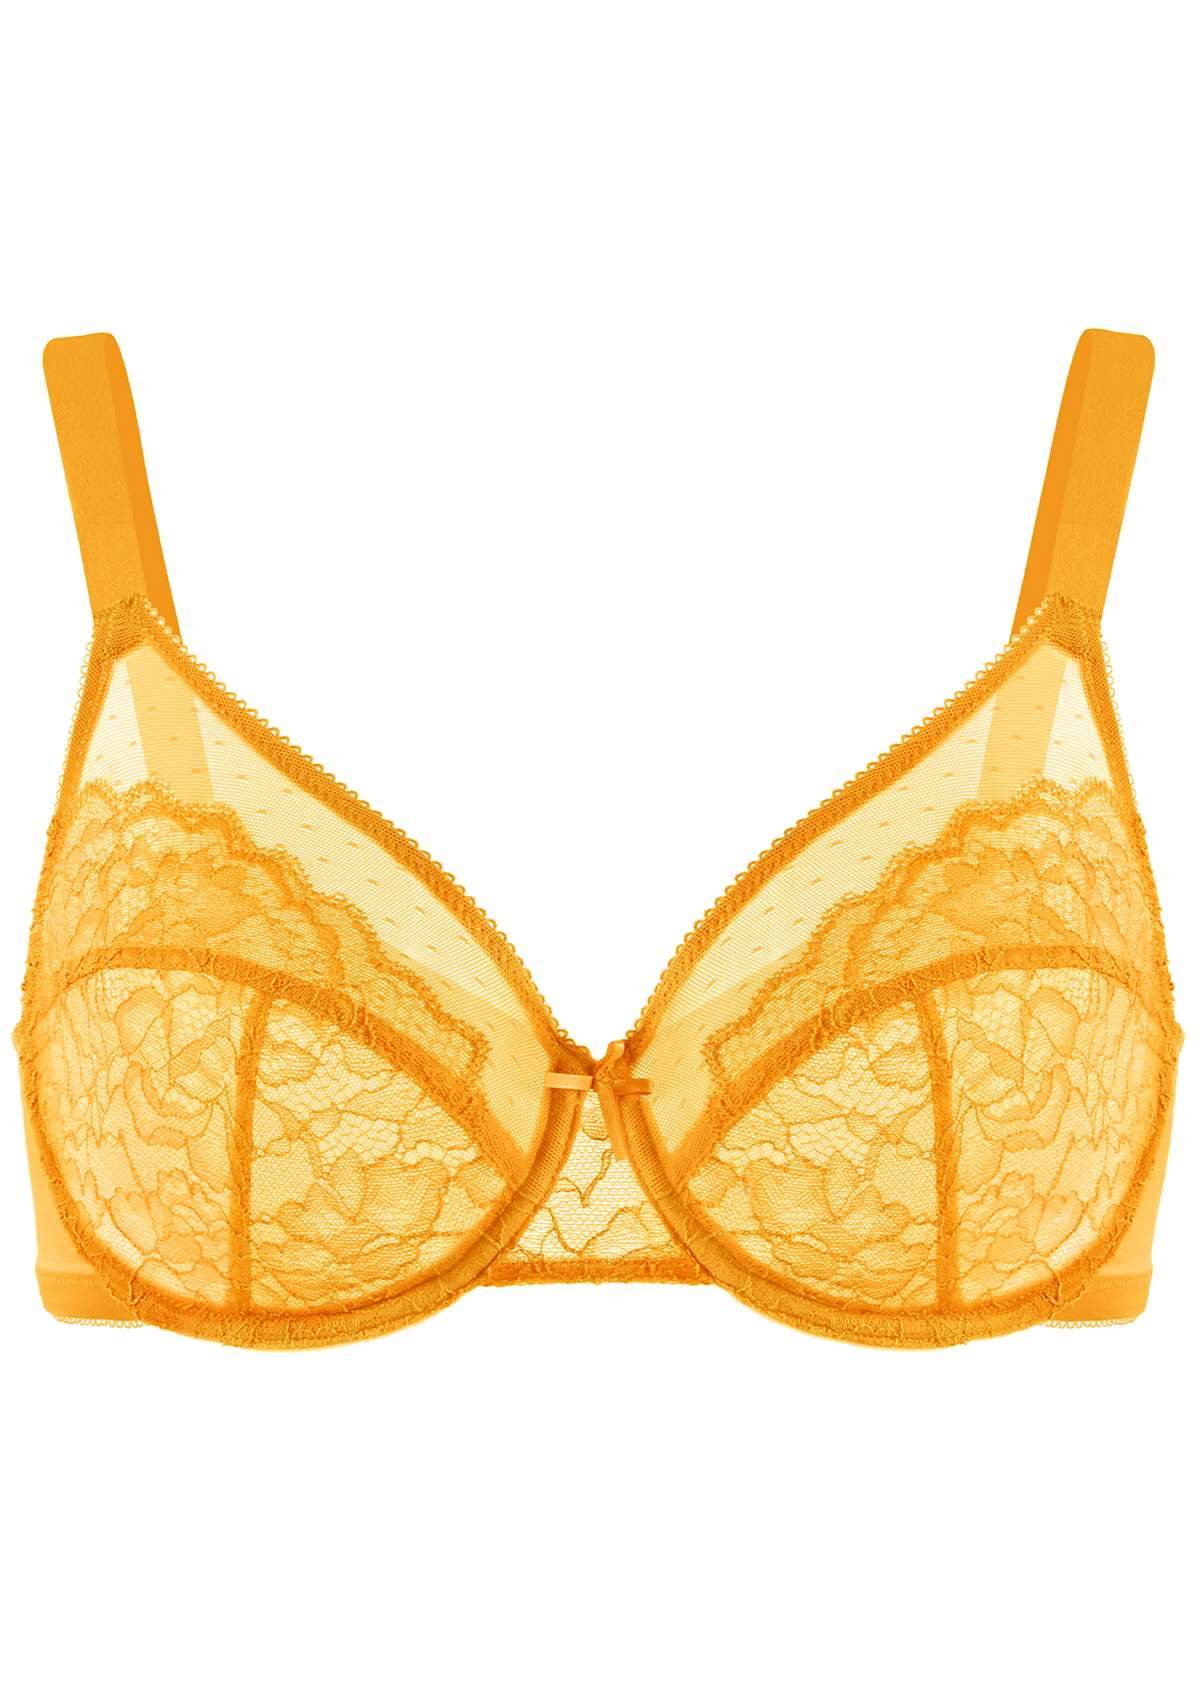 HSIA Enchante Bra And Panty Sets: Unpadded Bra With Back Support - Cadmium Yellow / 40 / DDD/F